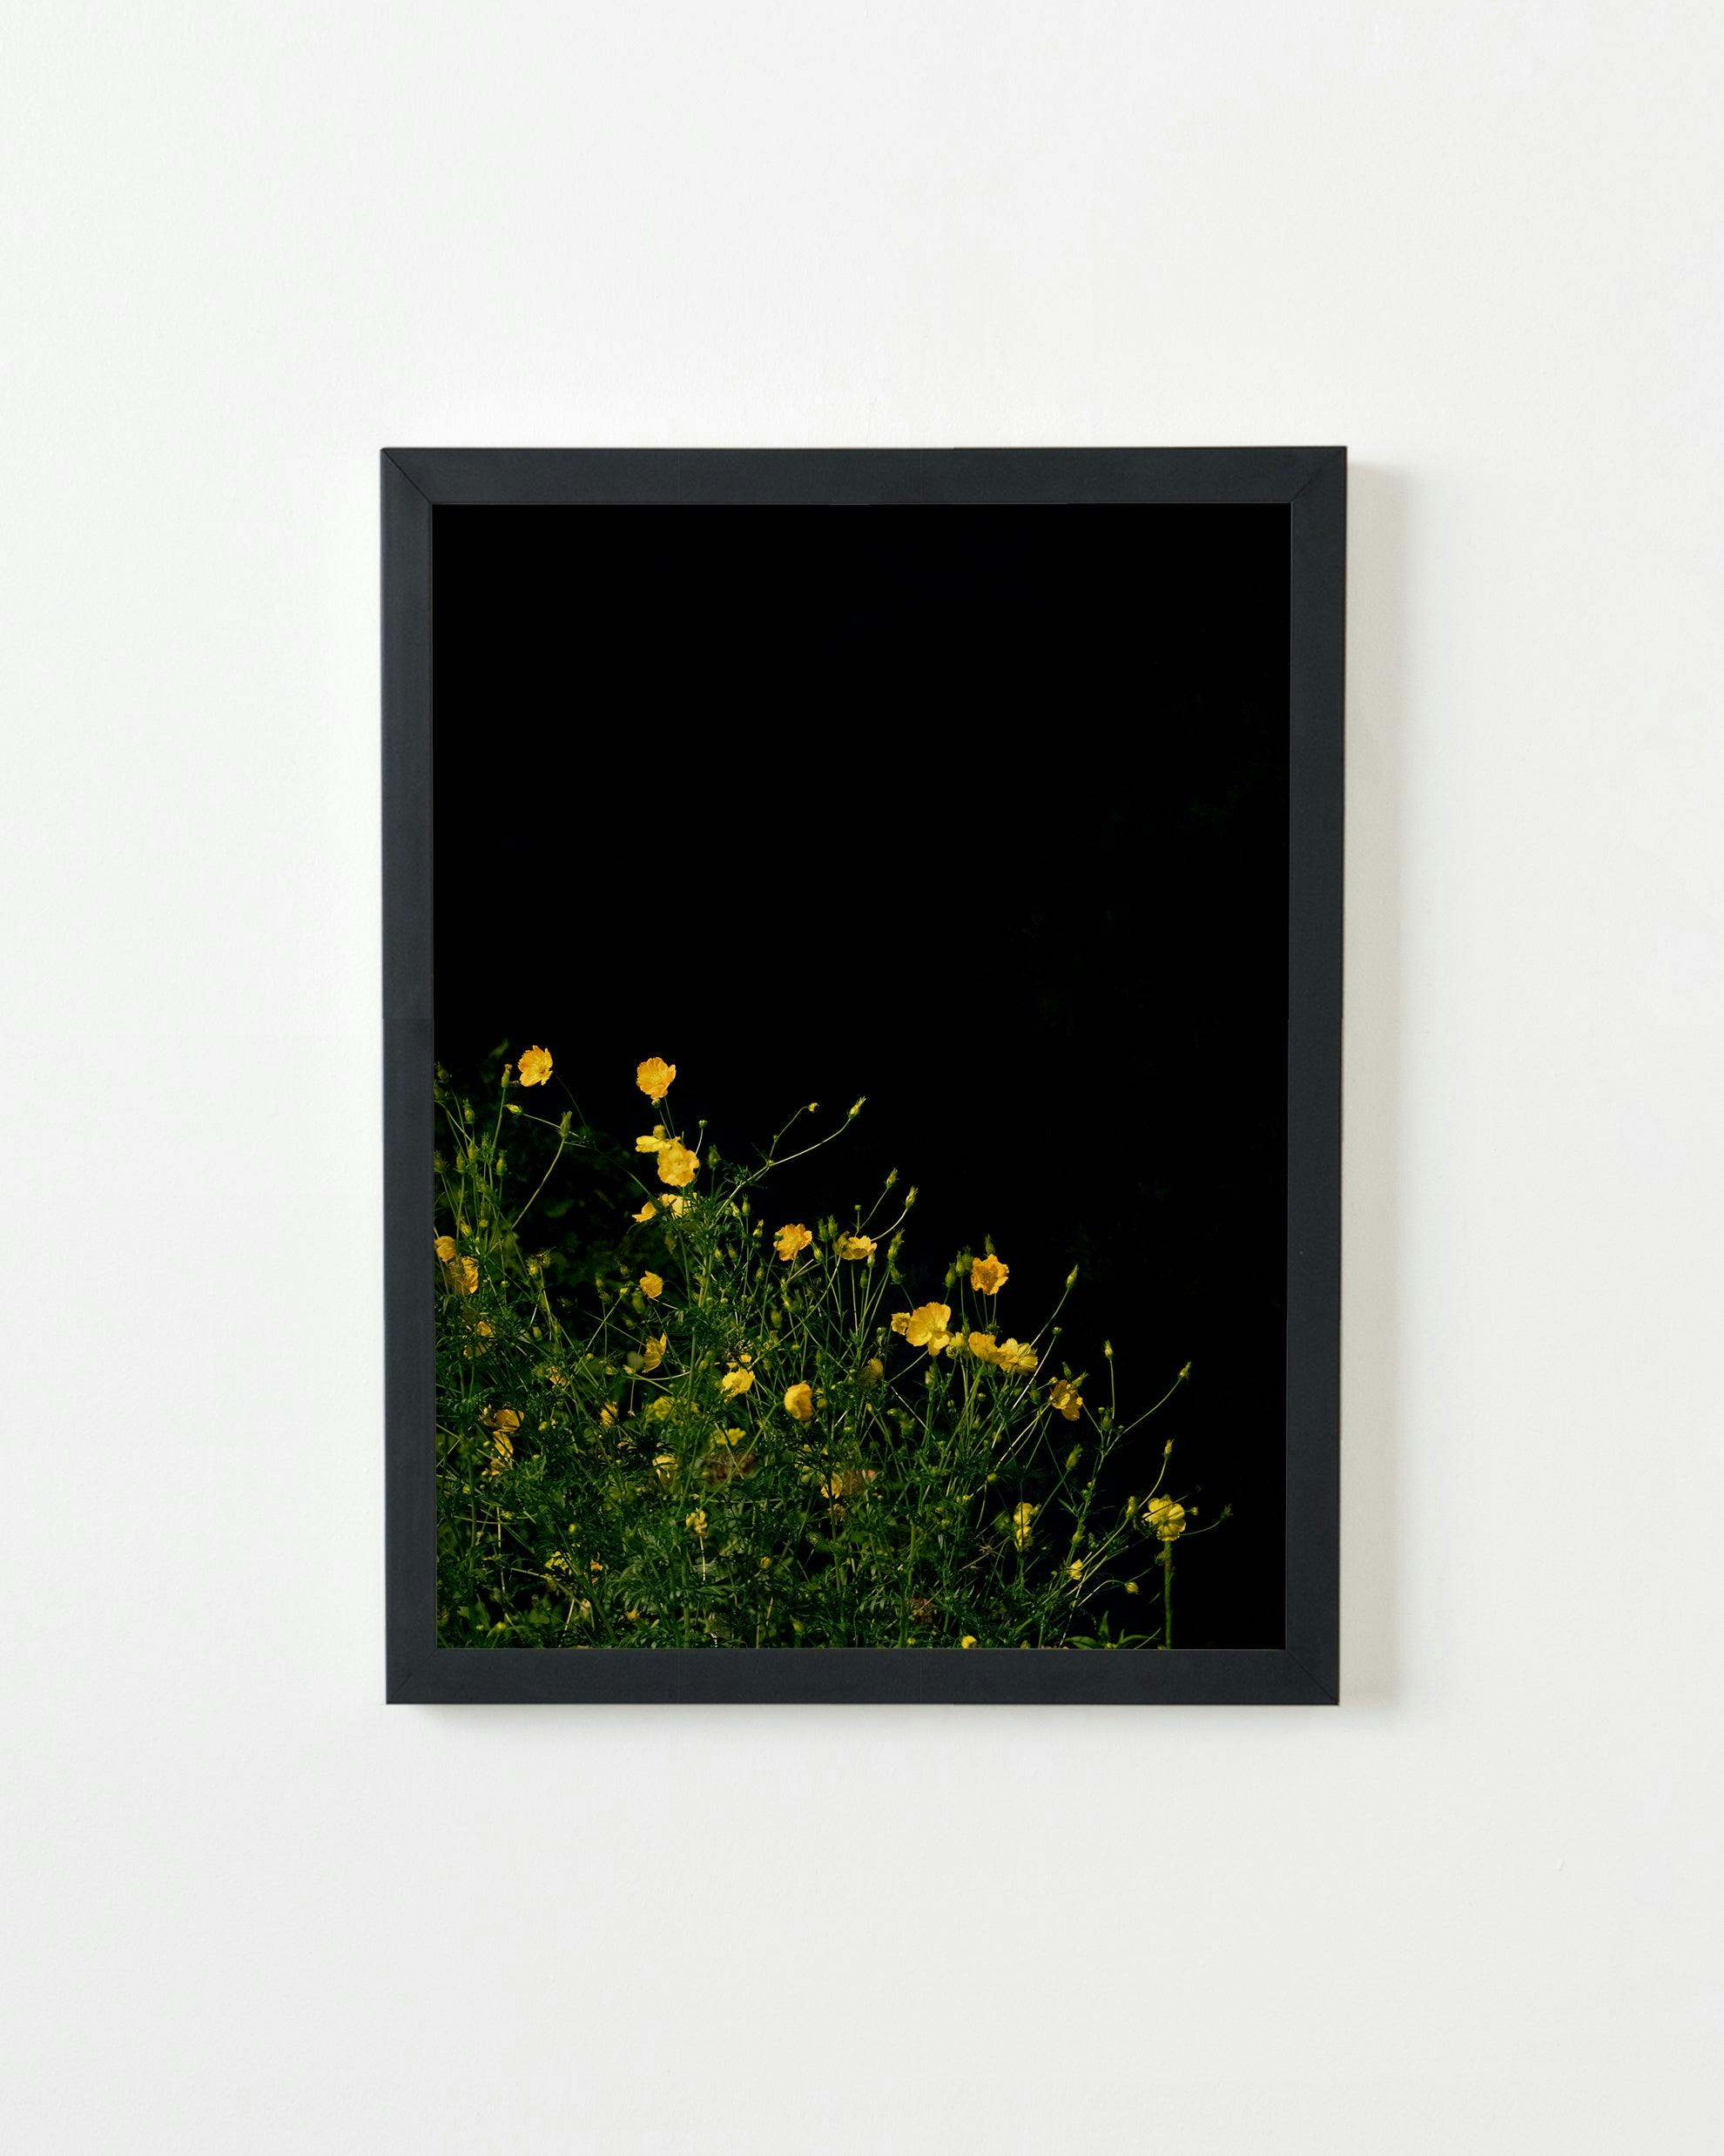 Photography by Anna Beeke titled "Midnight in the Garden #32".